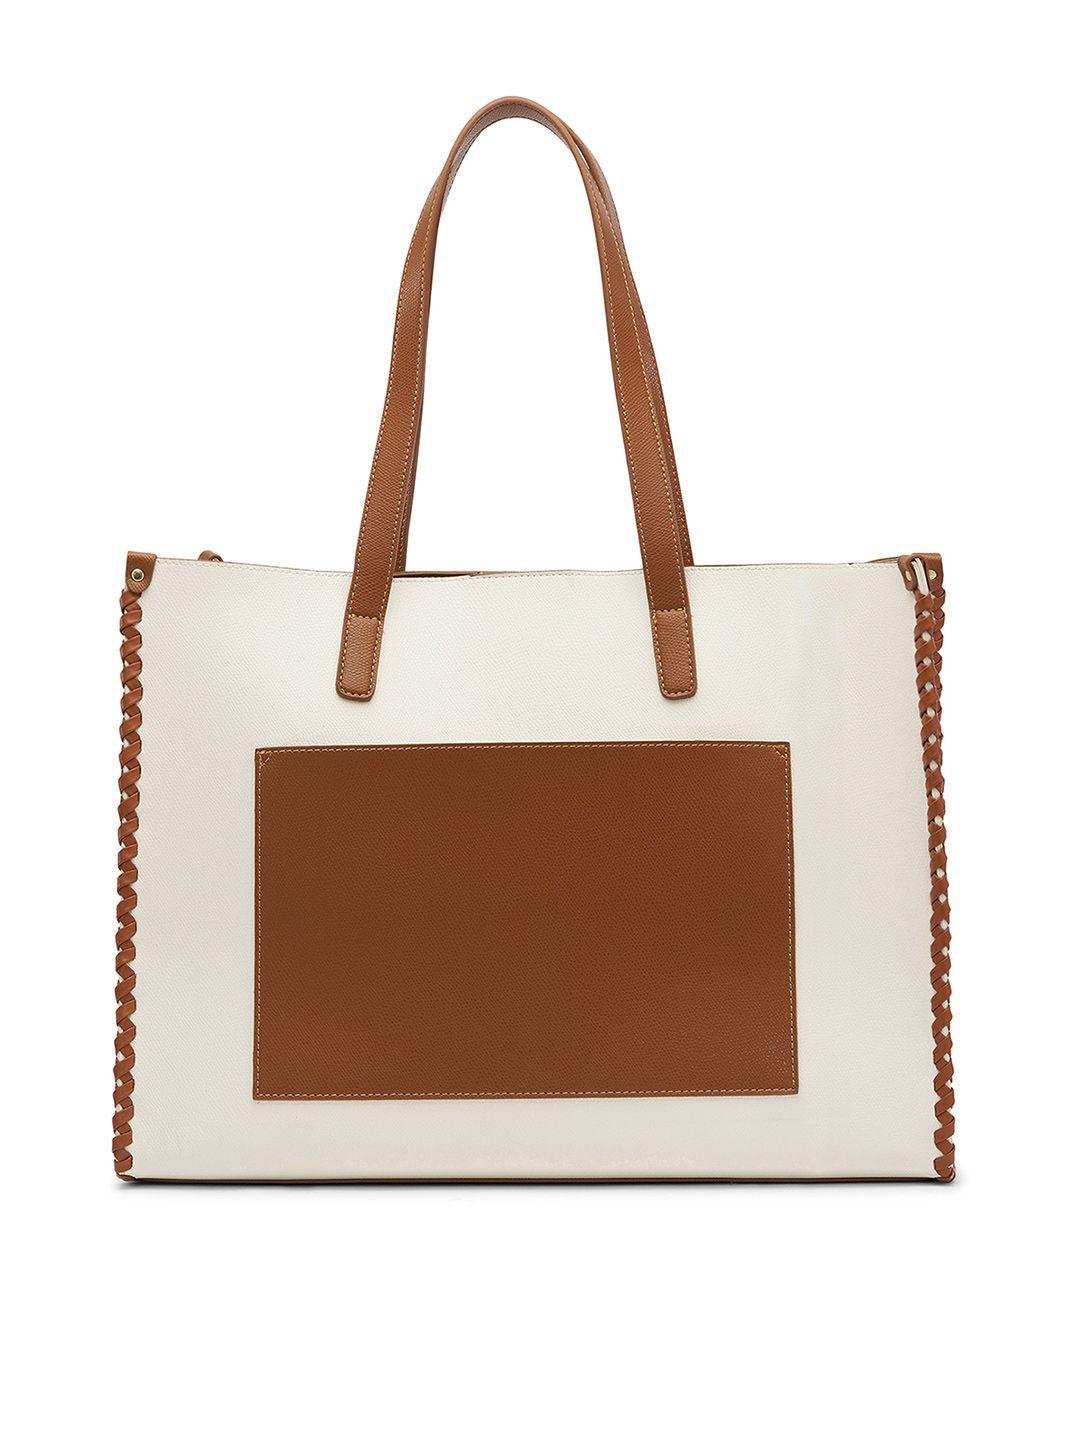 miraggio white & brown large tote bag with front pocket & weave detailing